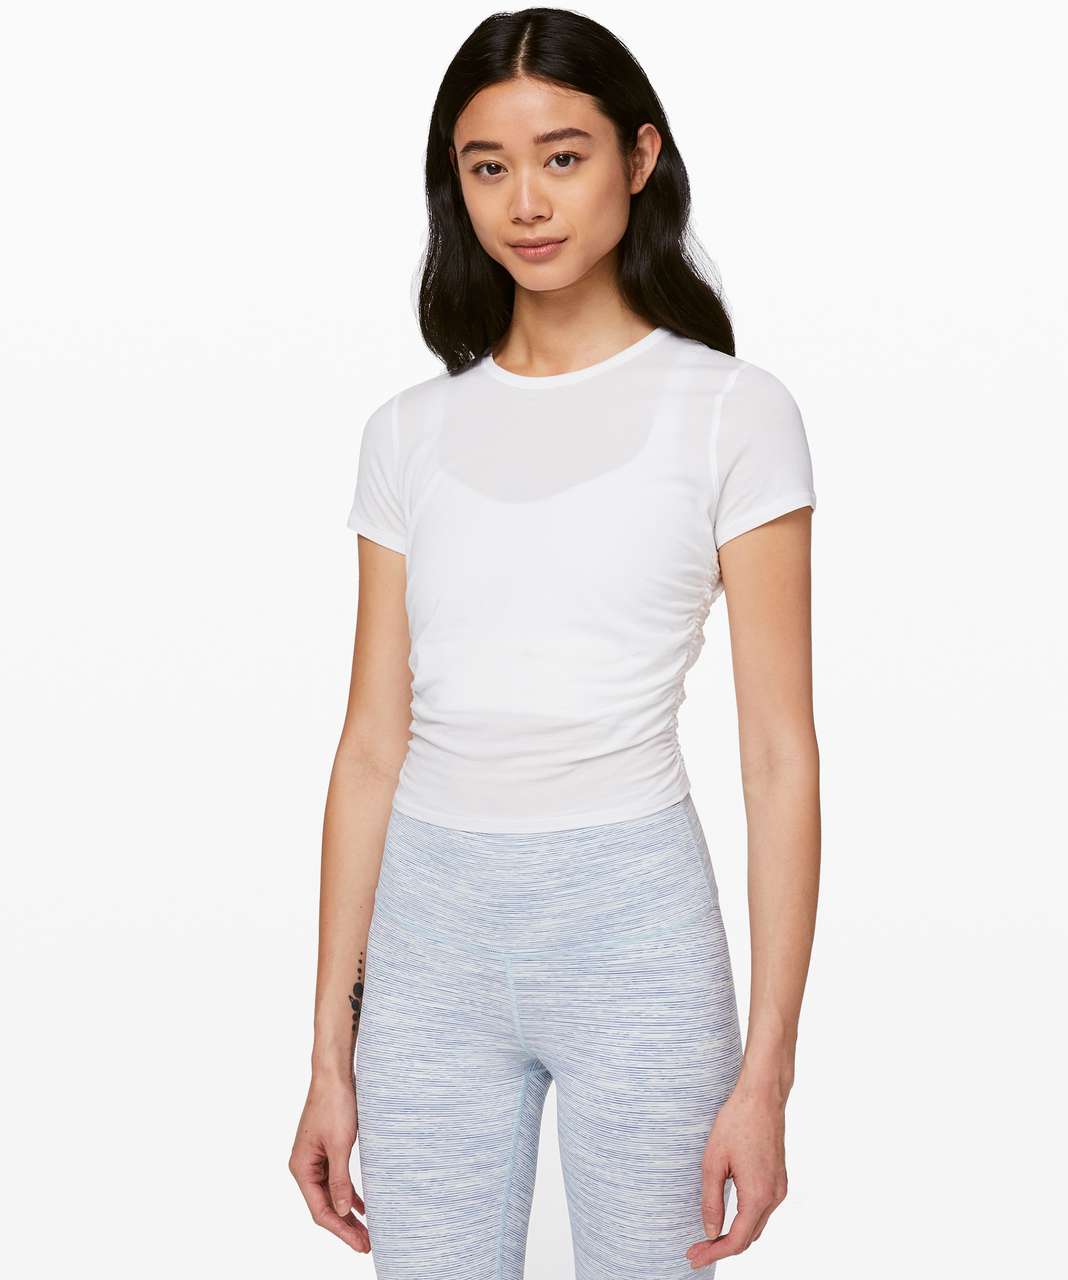 Lululemon All It Takes Short Sleeve - White (First Release)